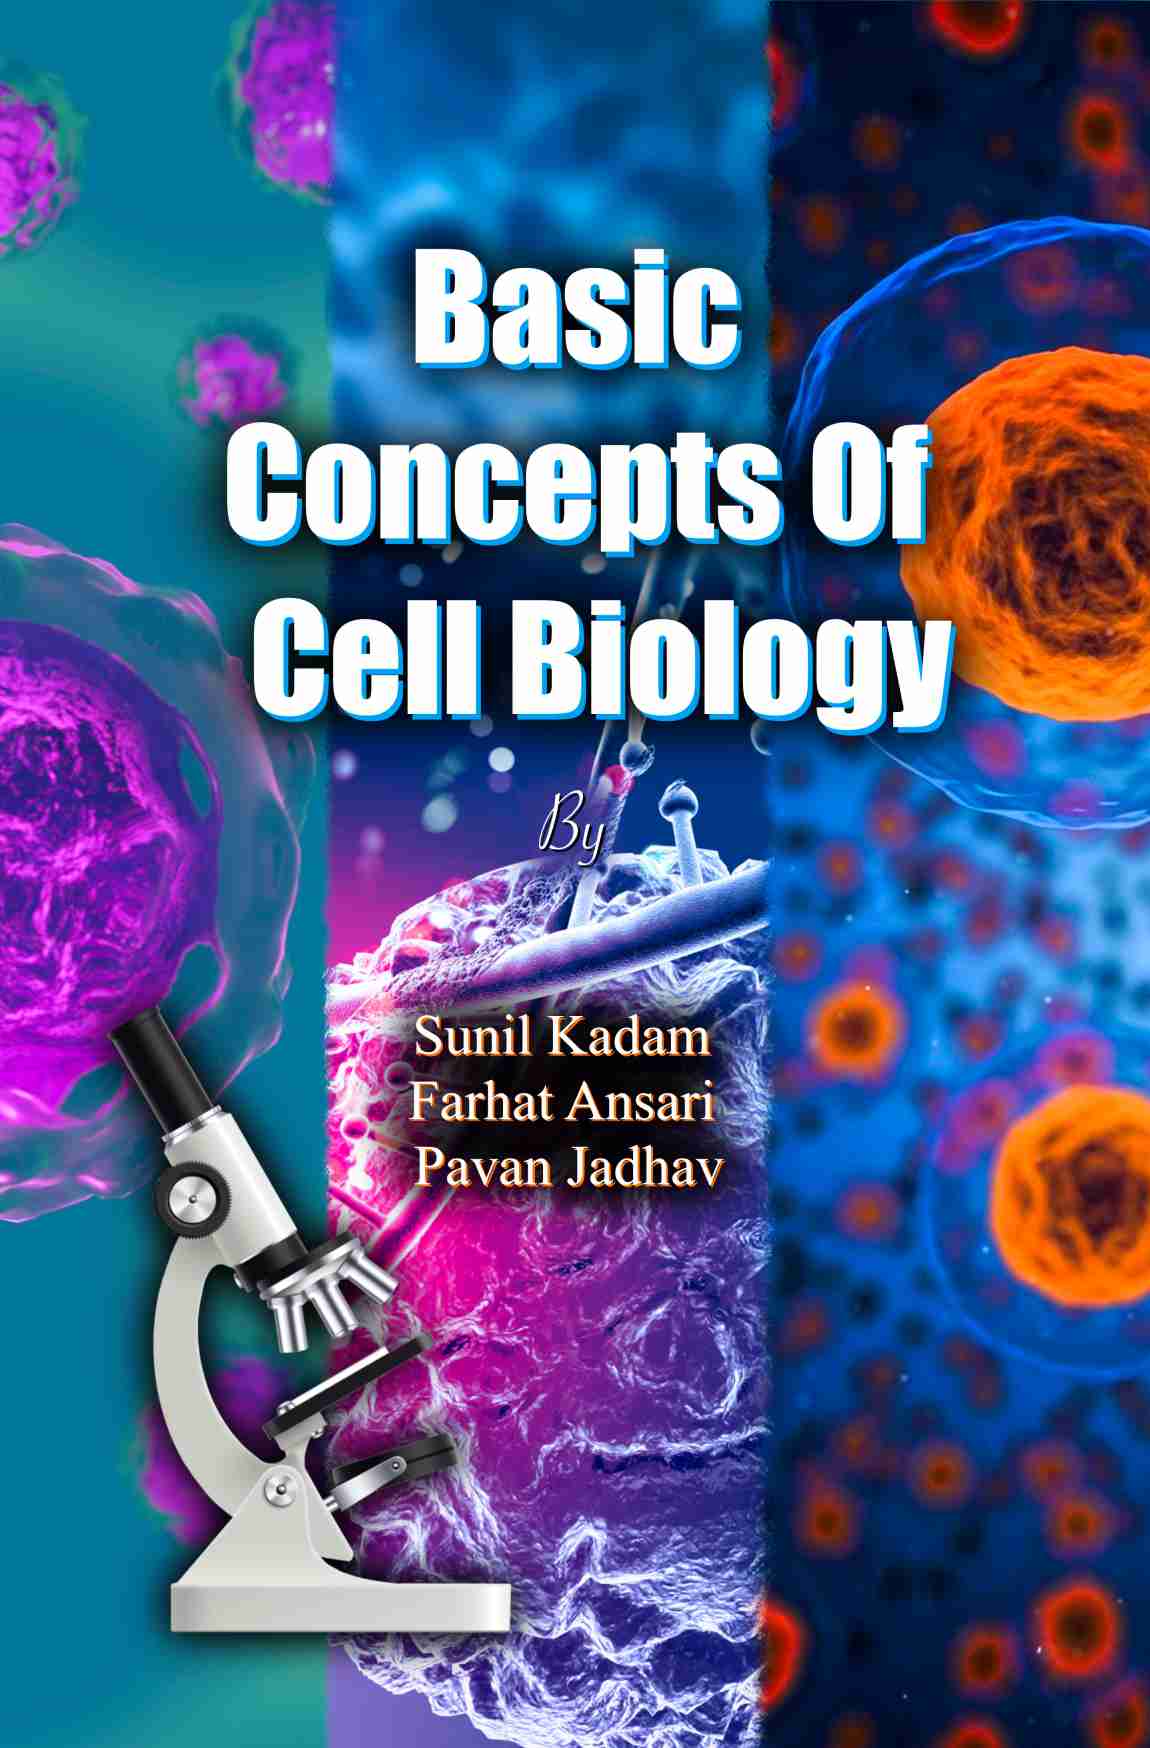 Basic Concepts of Cell Biology